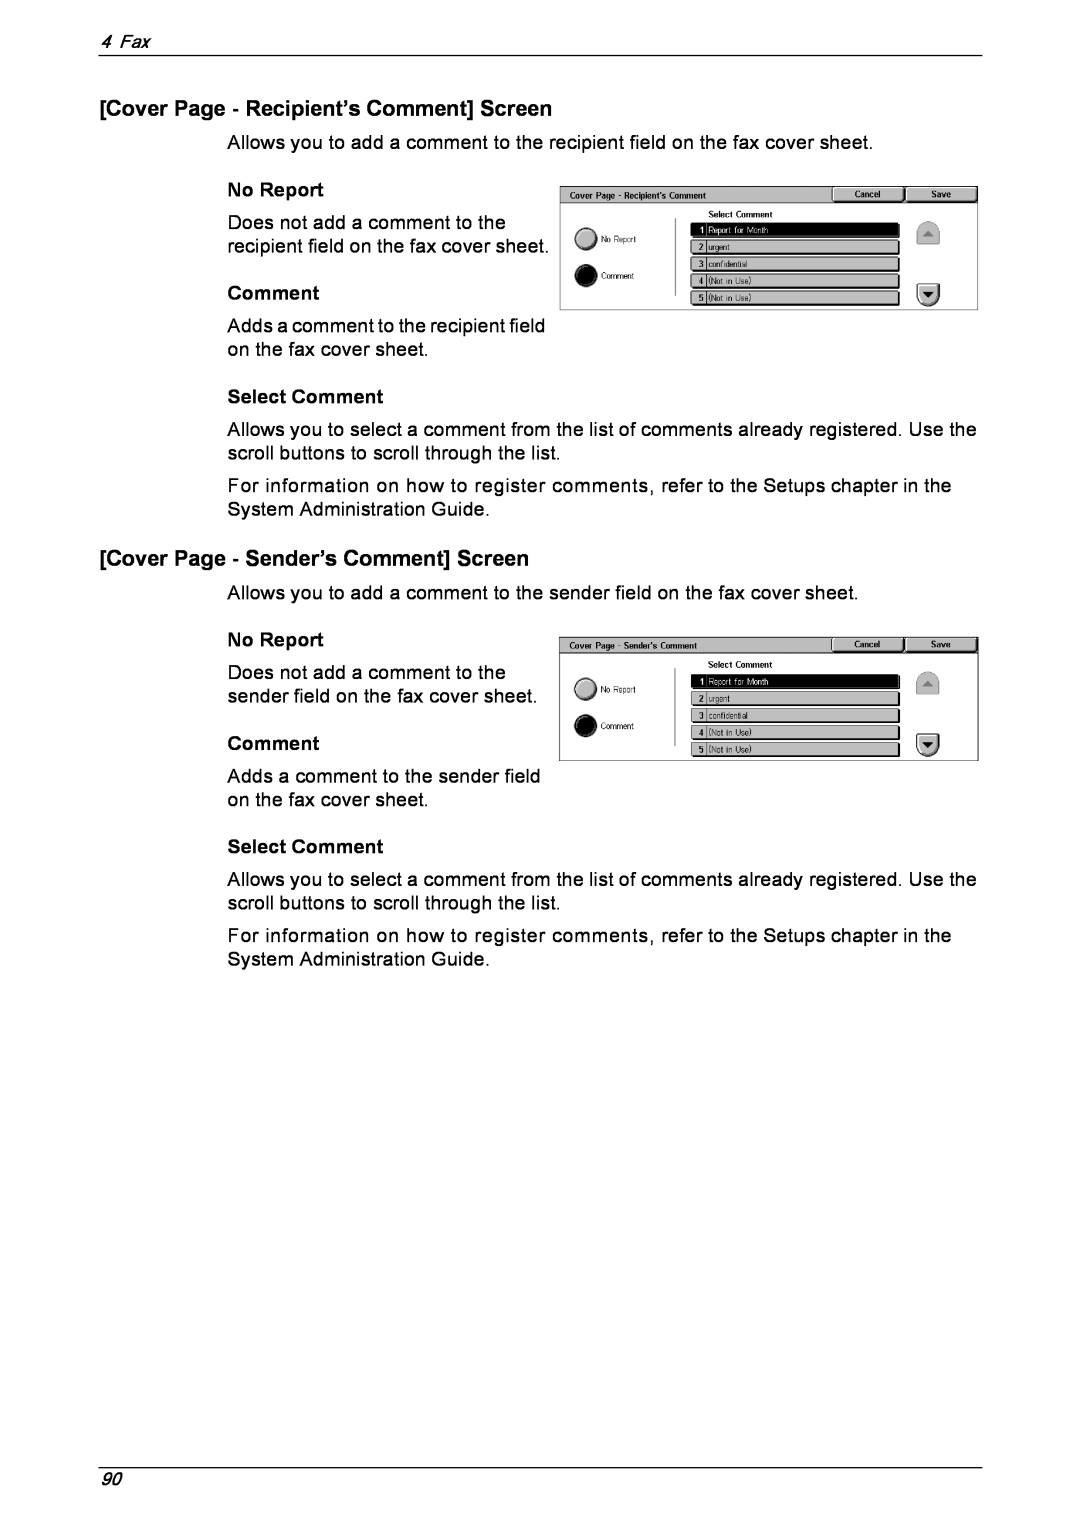 Xerox 5230 manual Cover Page - Recipient’s Comment Screen, Cover Page - Sender’s Comment Screen, No Report, Select Comment 